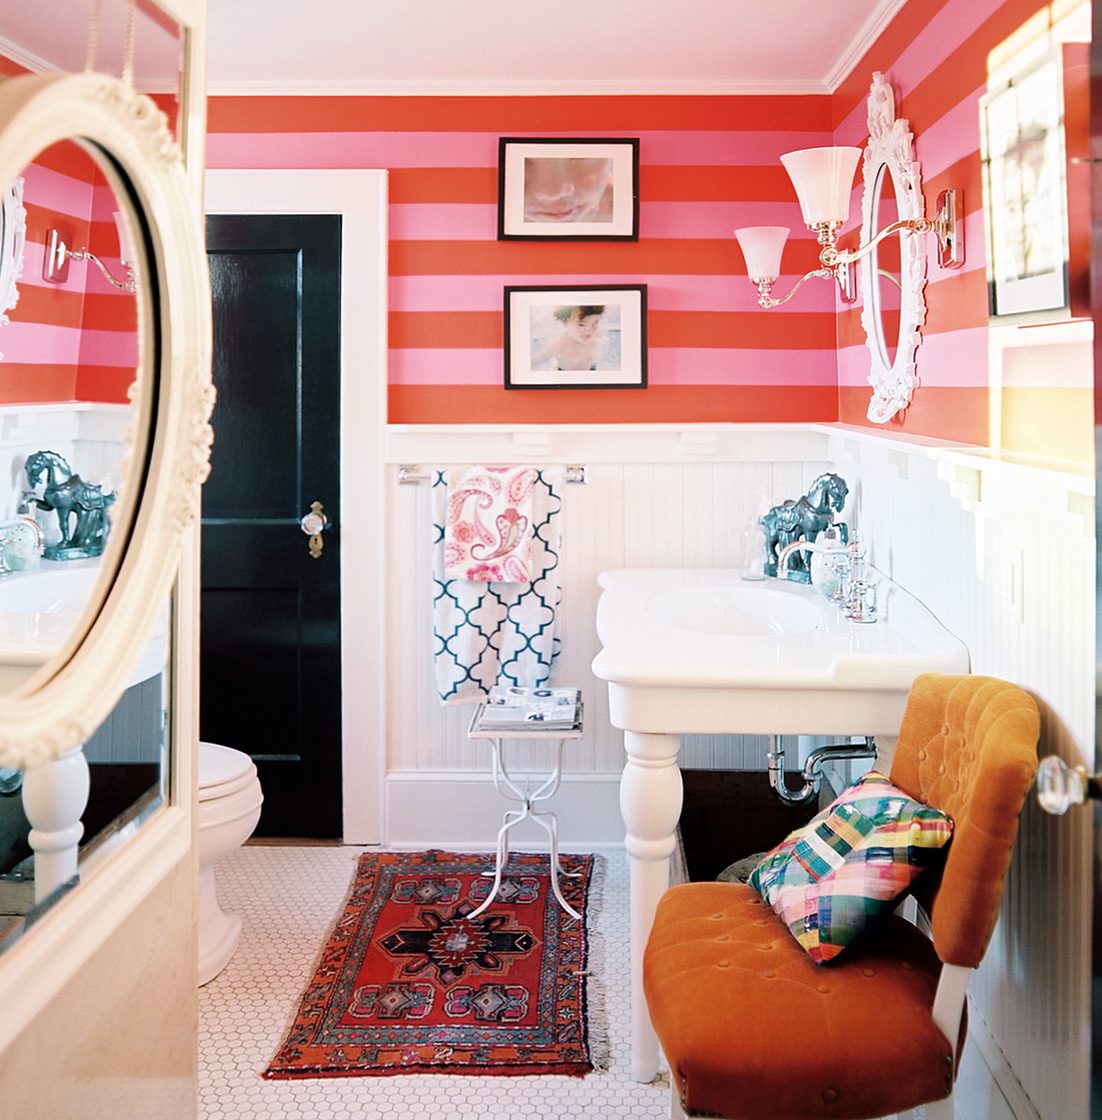 8 Ways to Master an Eclectic Bathroom Design